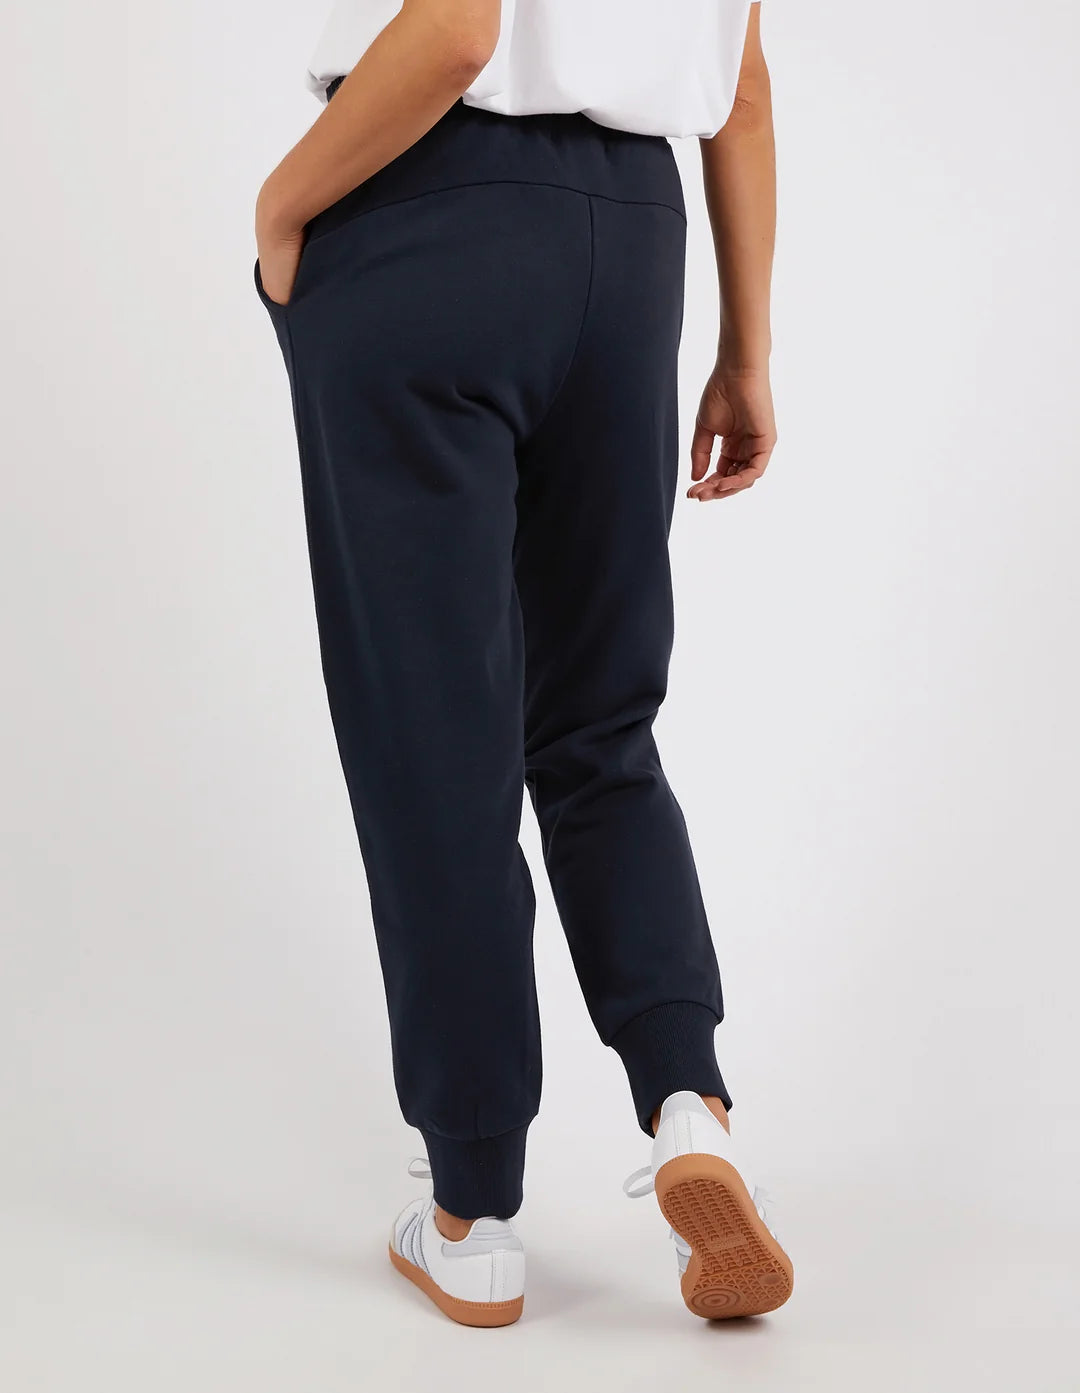 
                  
                    MEDALION TRACK PANT NAVY
                  
                